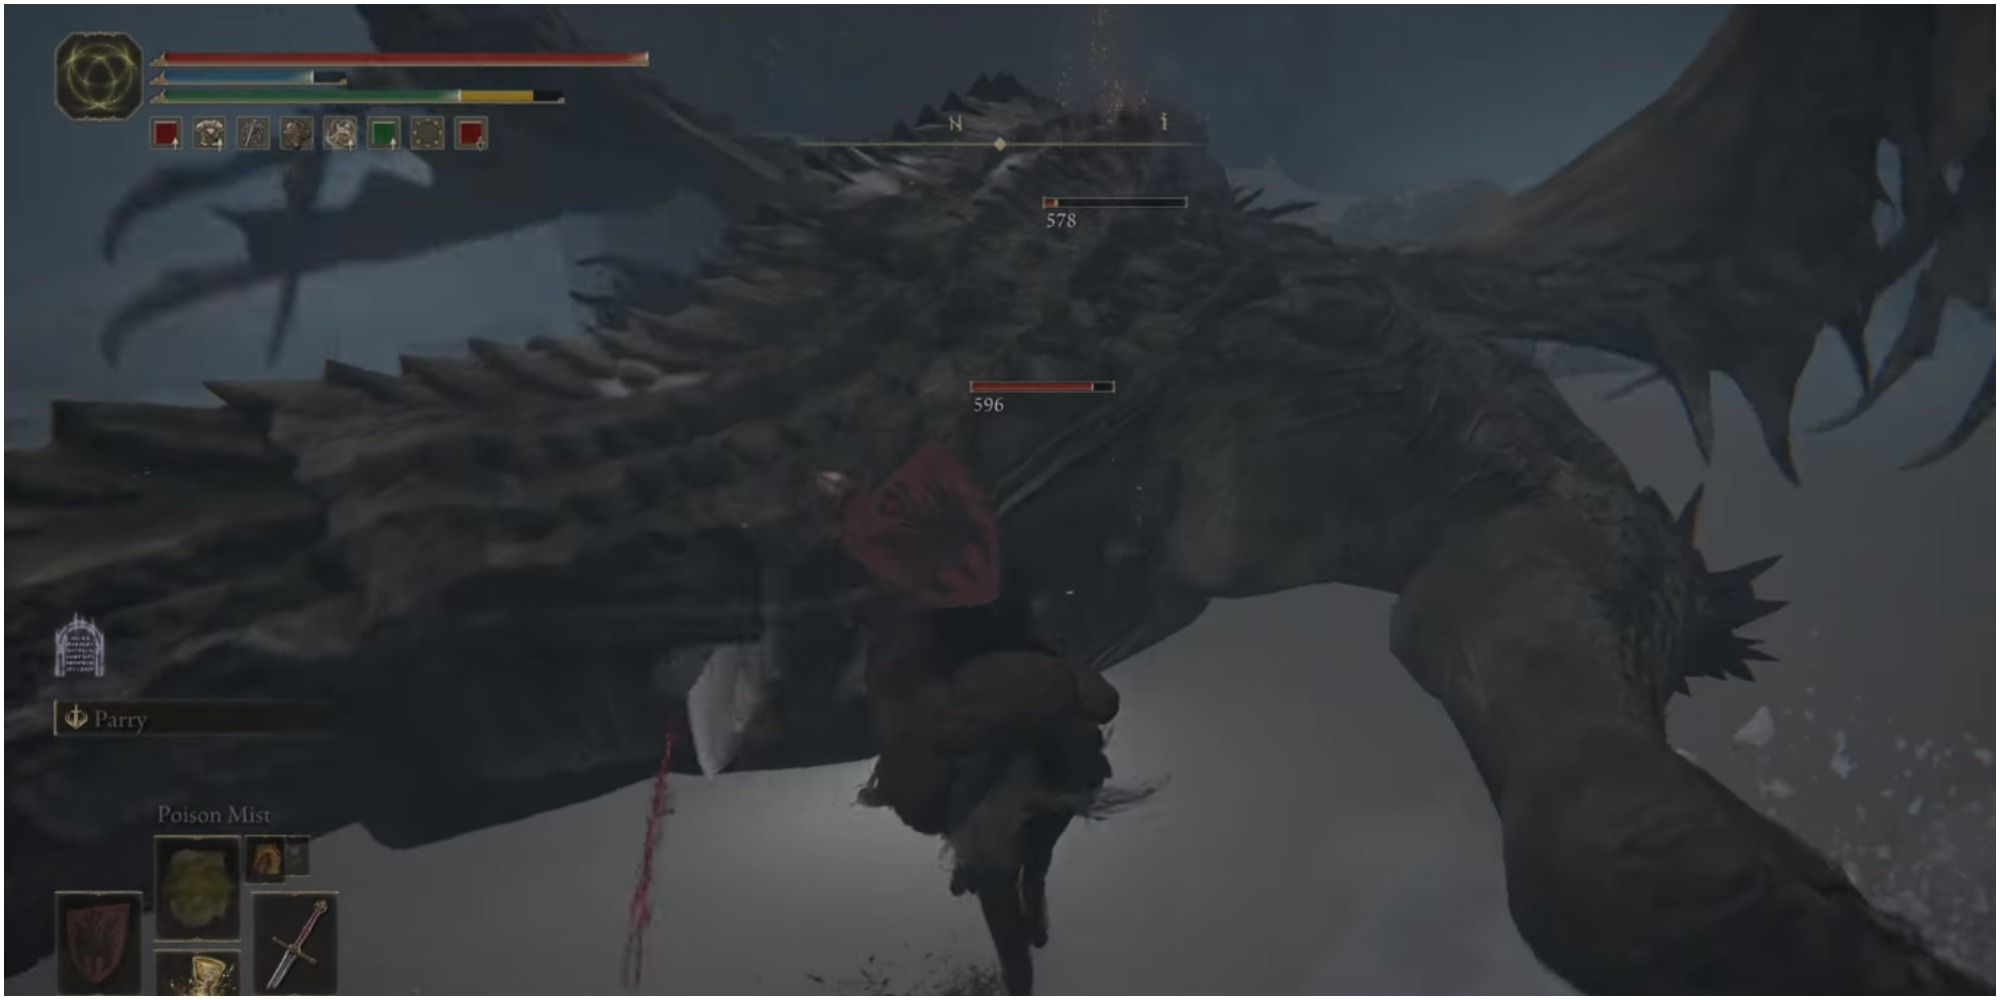 The player using a melee weapon to attack the boss.